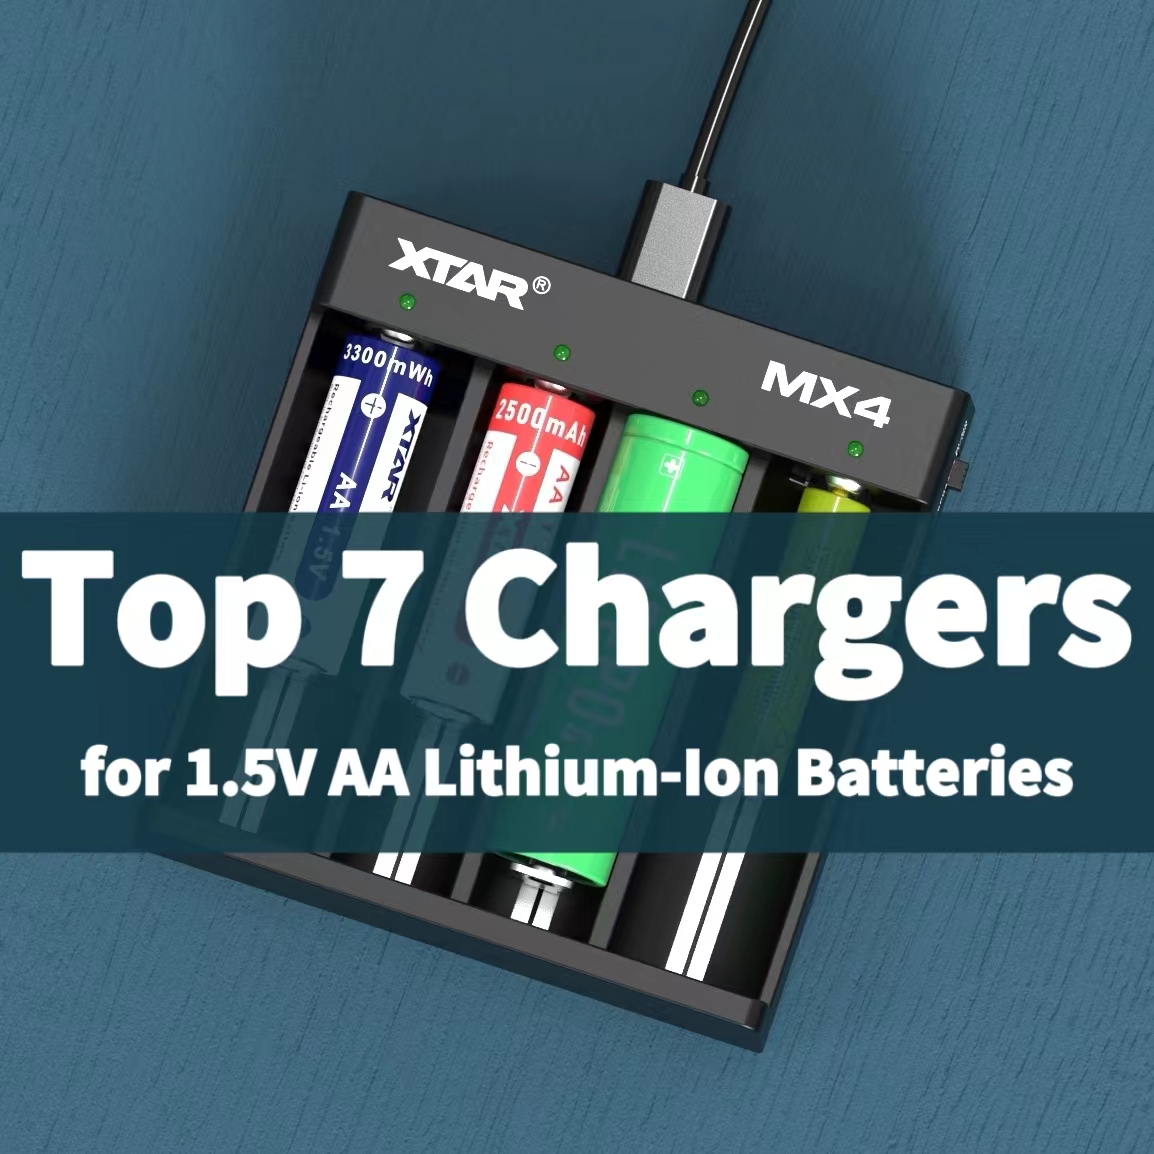 Top 7 Chargers for 1.5V AA Lithium-Ion Batteries